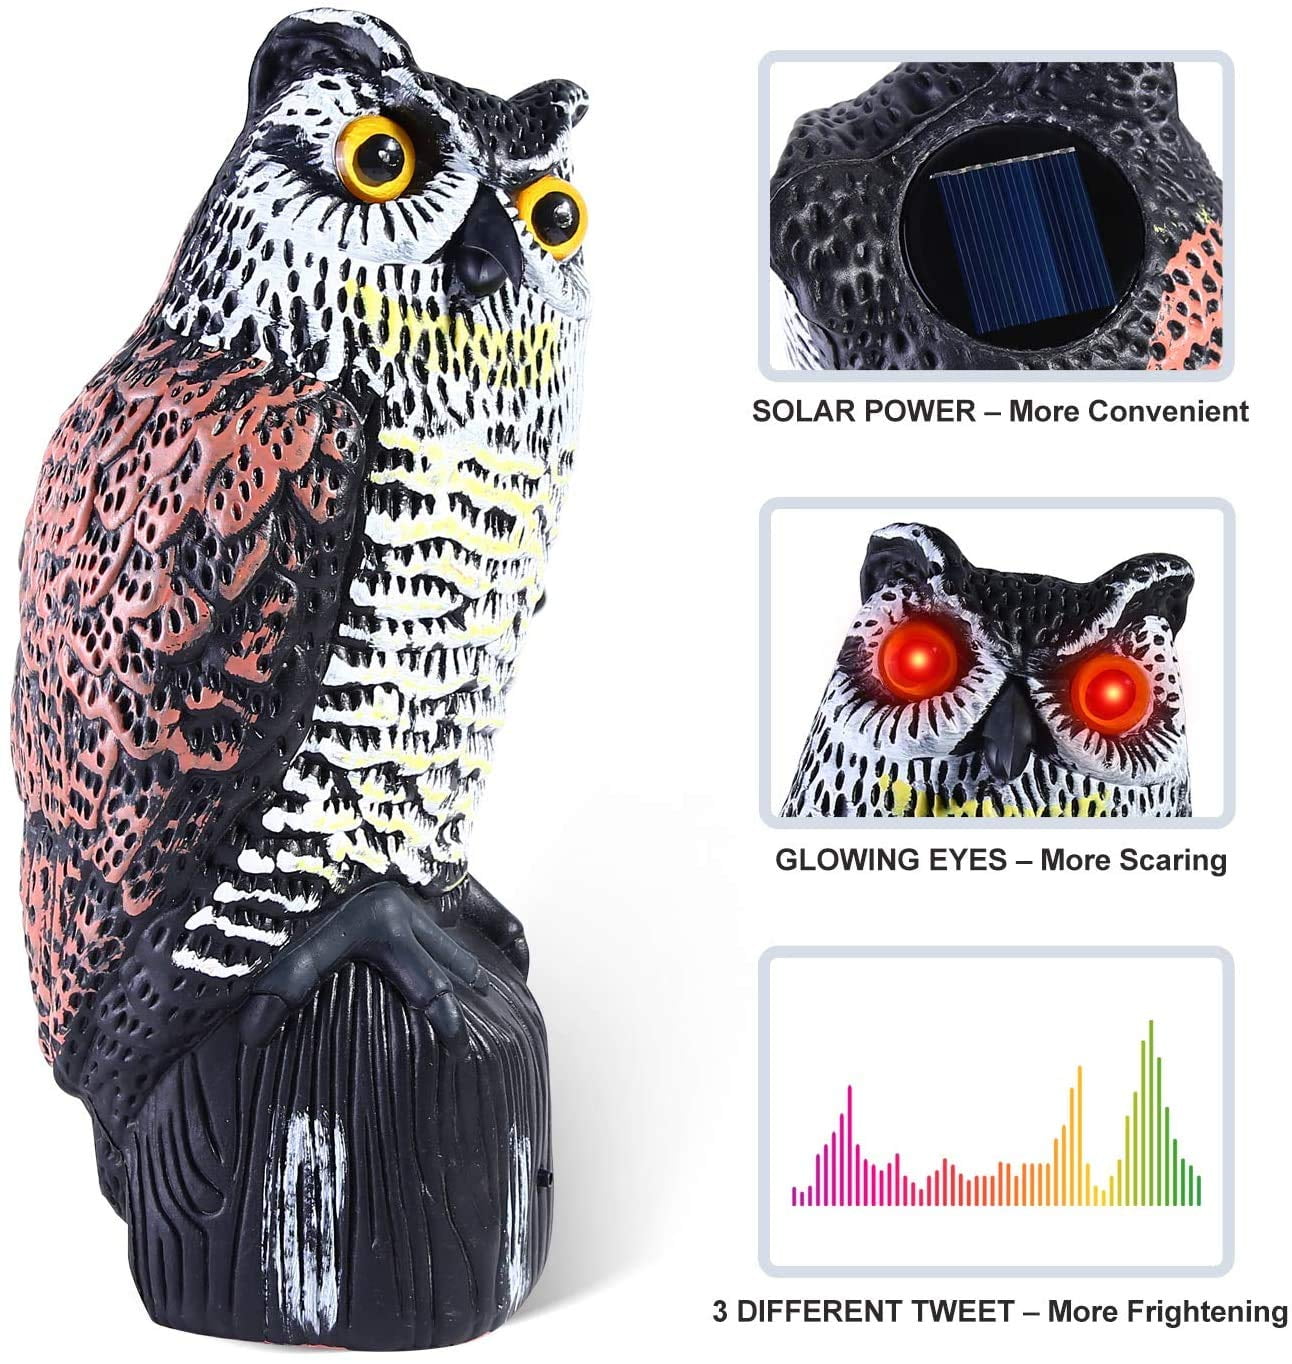 Owl Decoy to Scare Birds Away Fake Owl Statues with Flashing Eyes & Scary Sound 